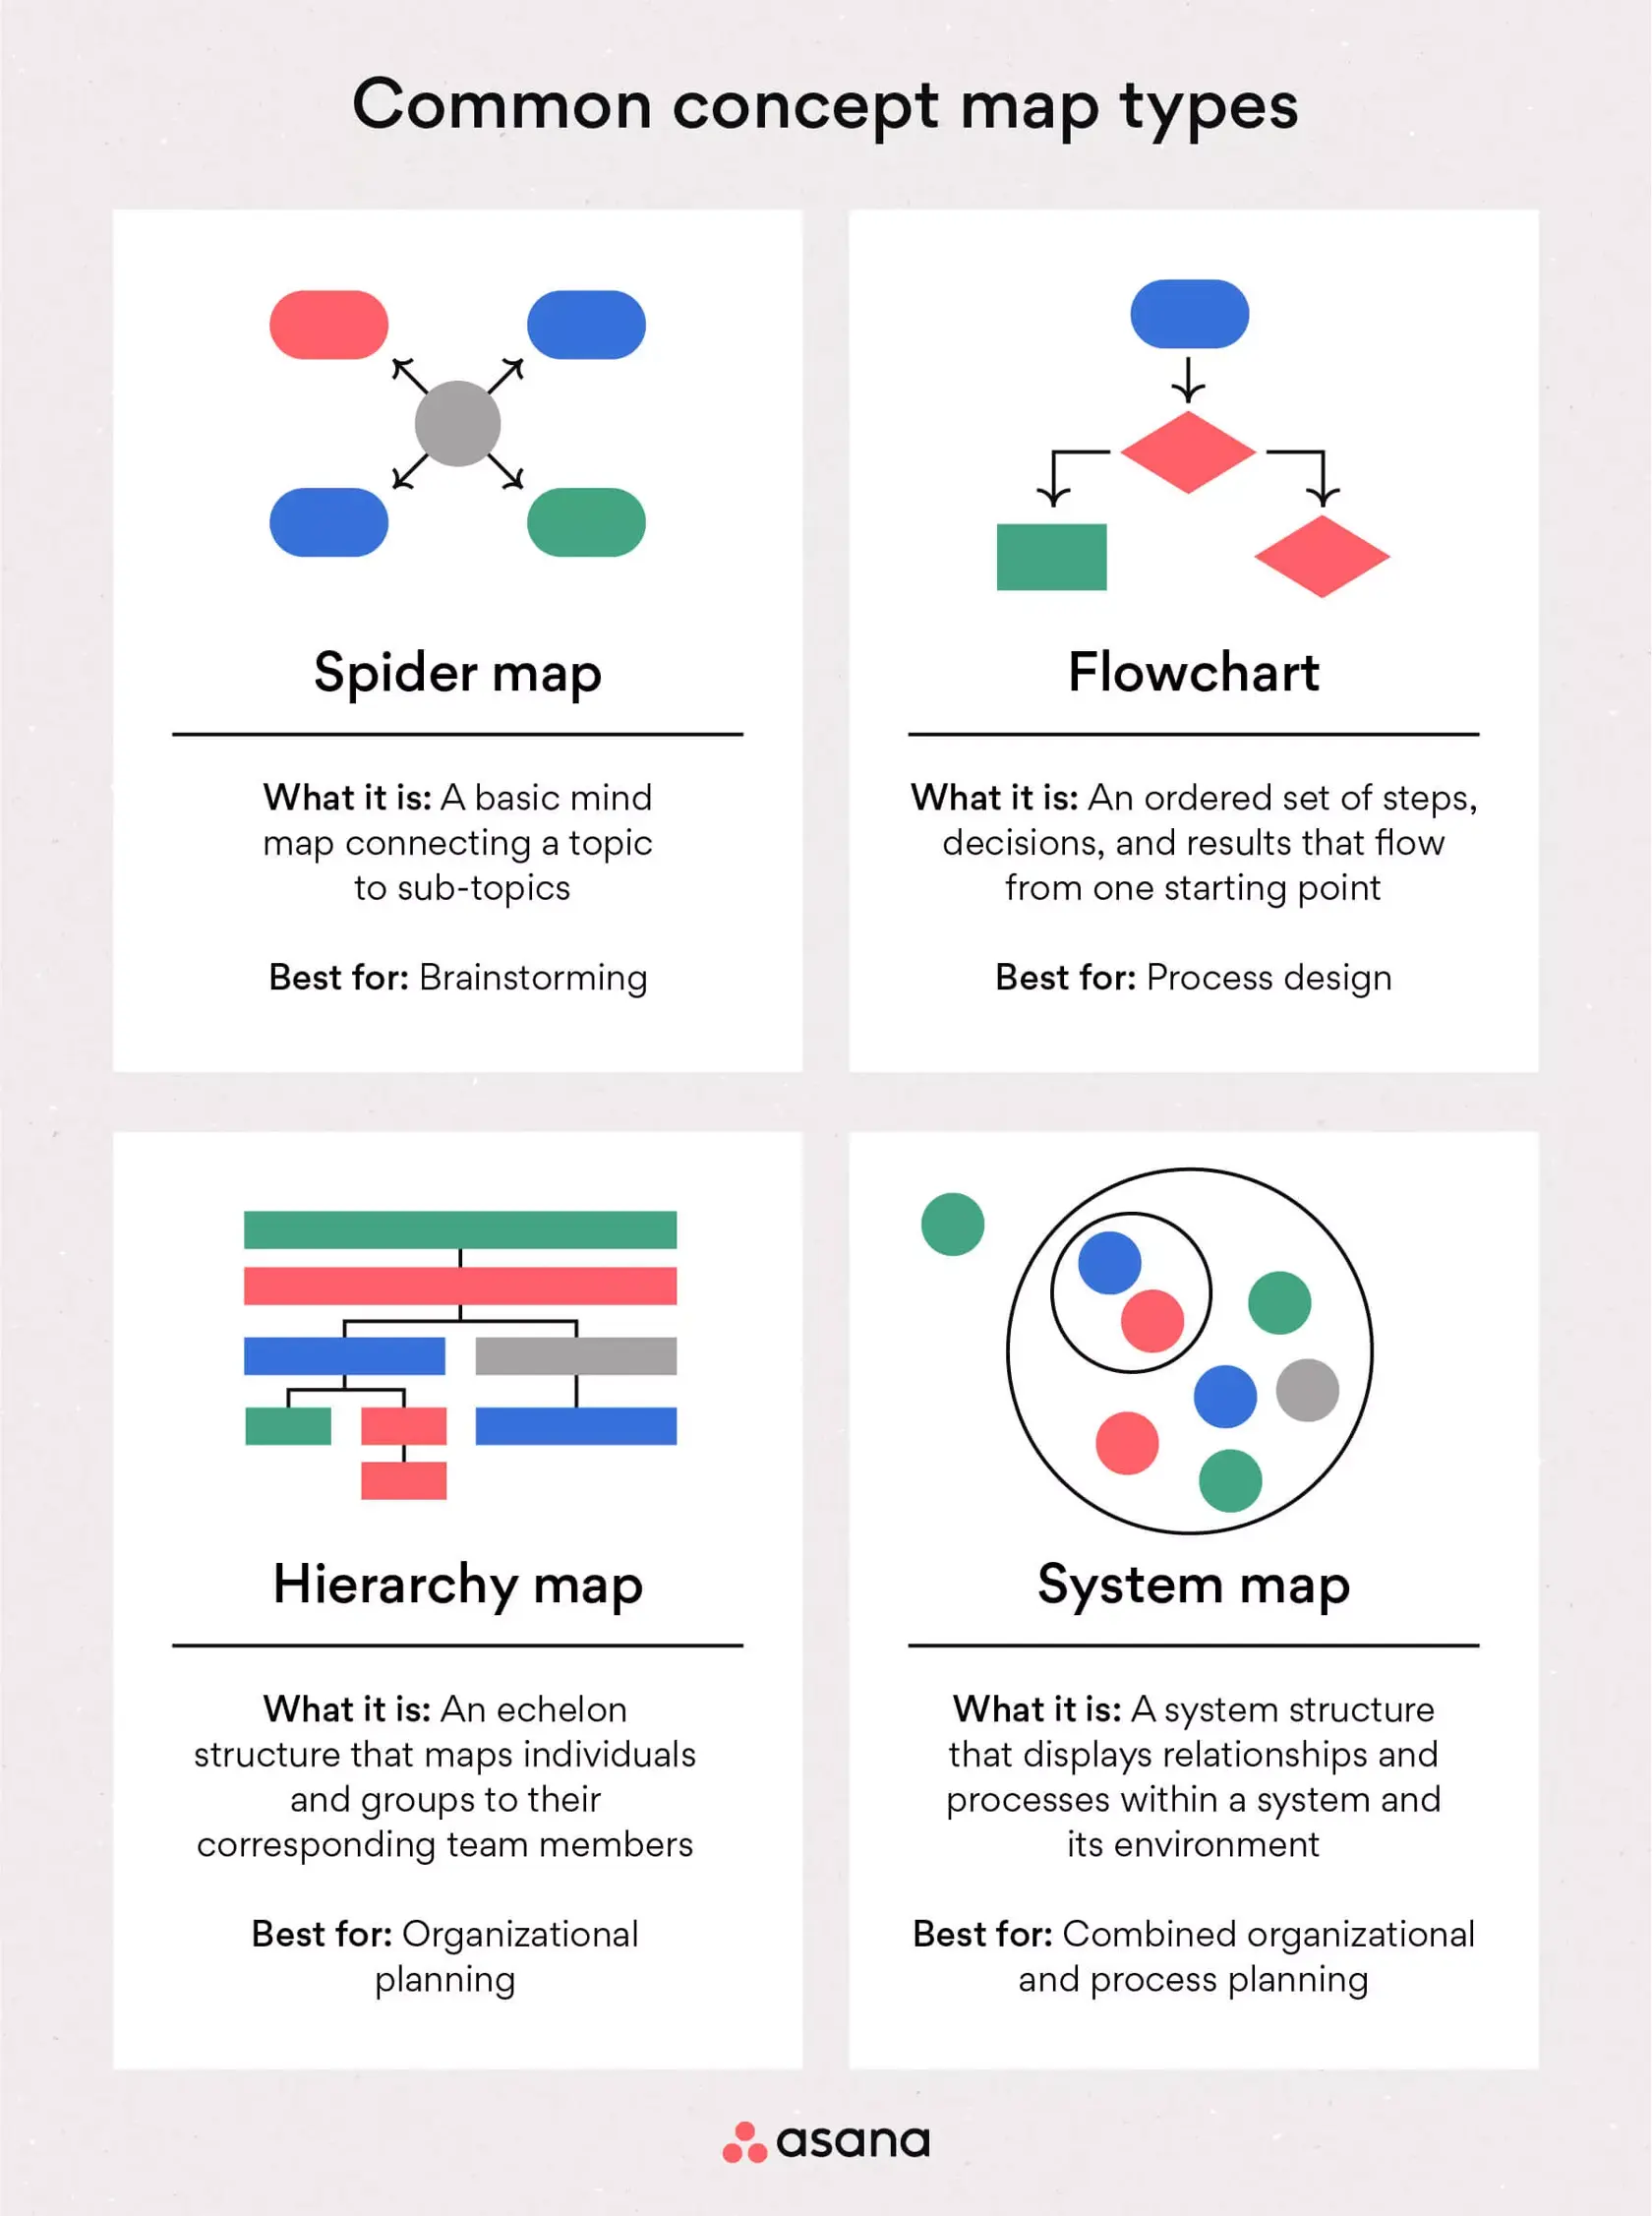 [inline illustration] Common concept map types (infographic)